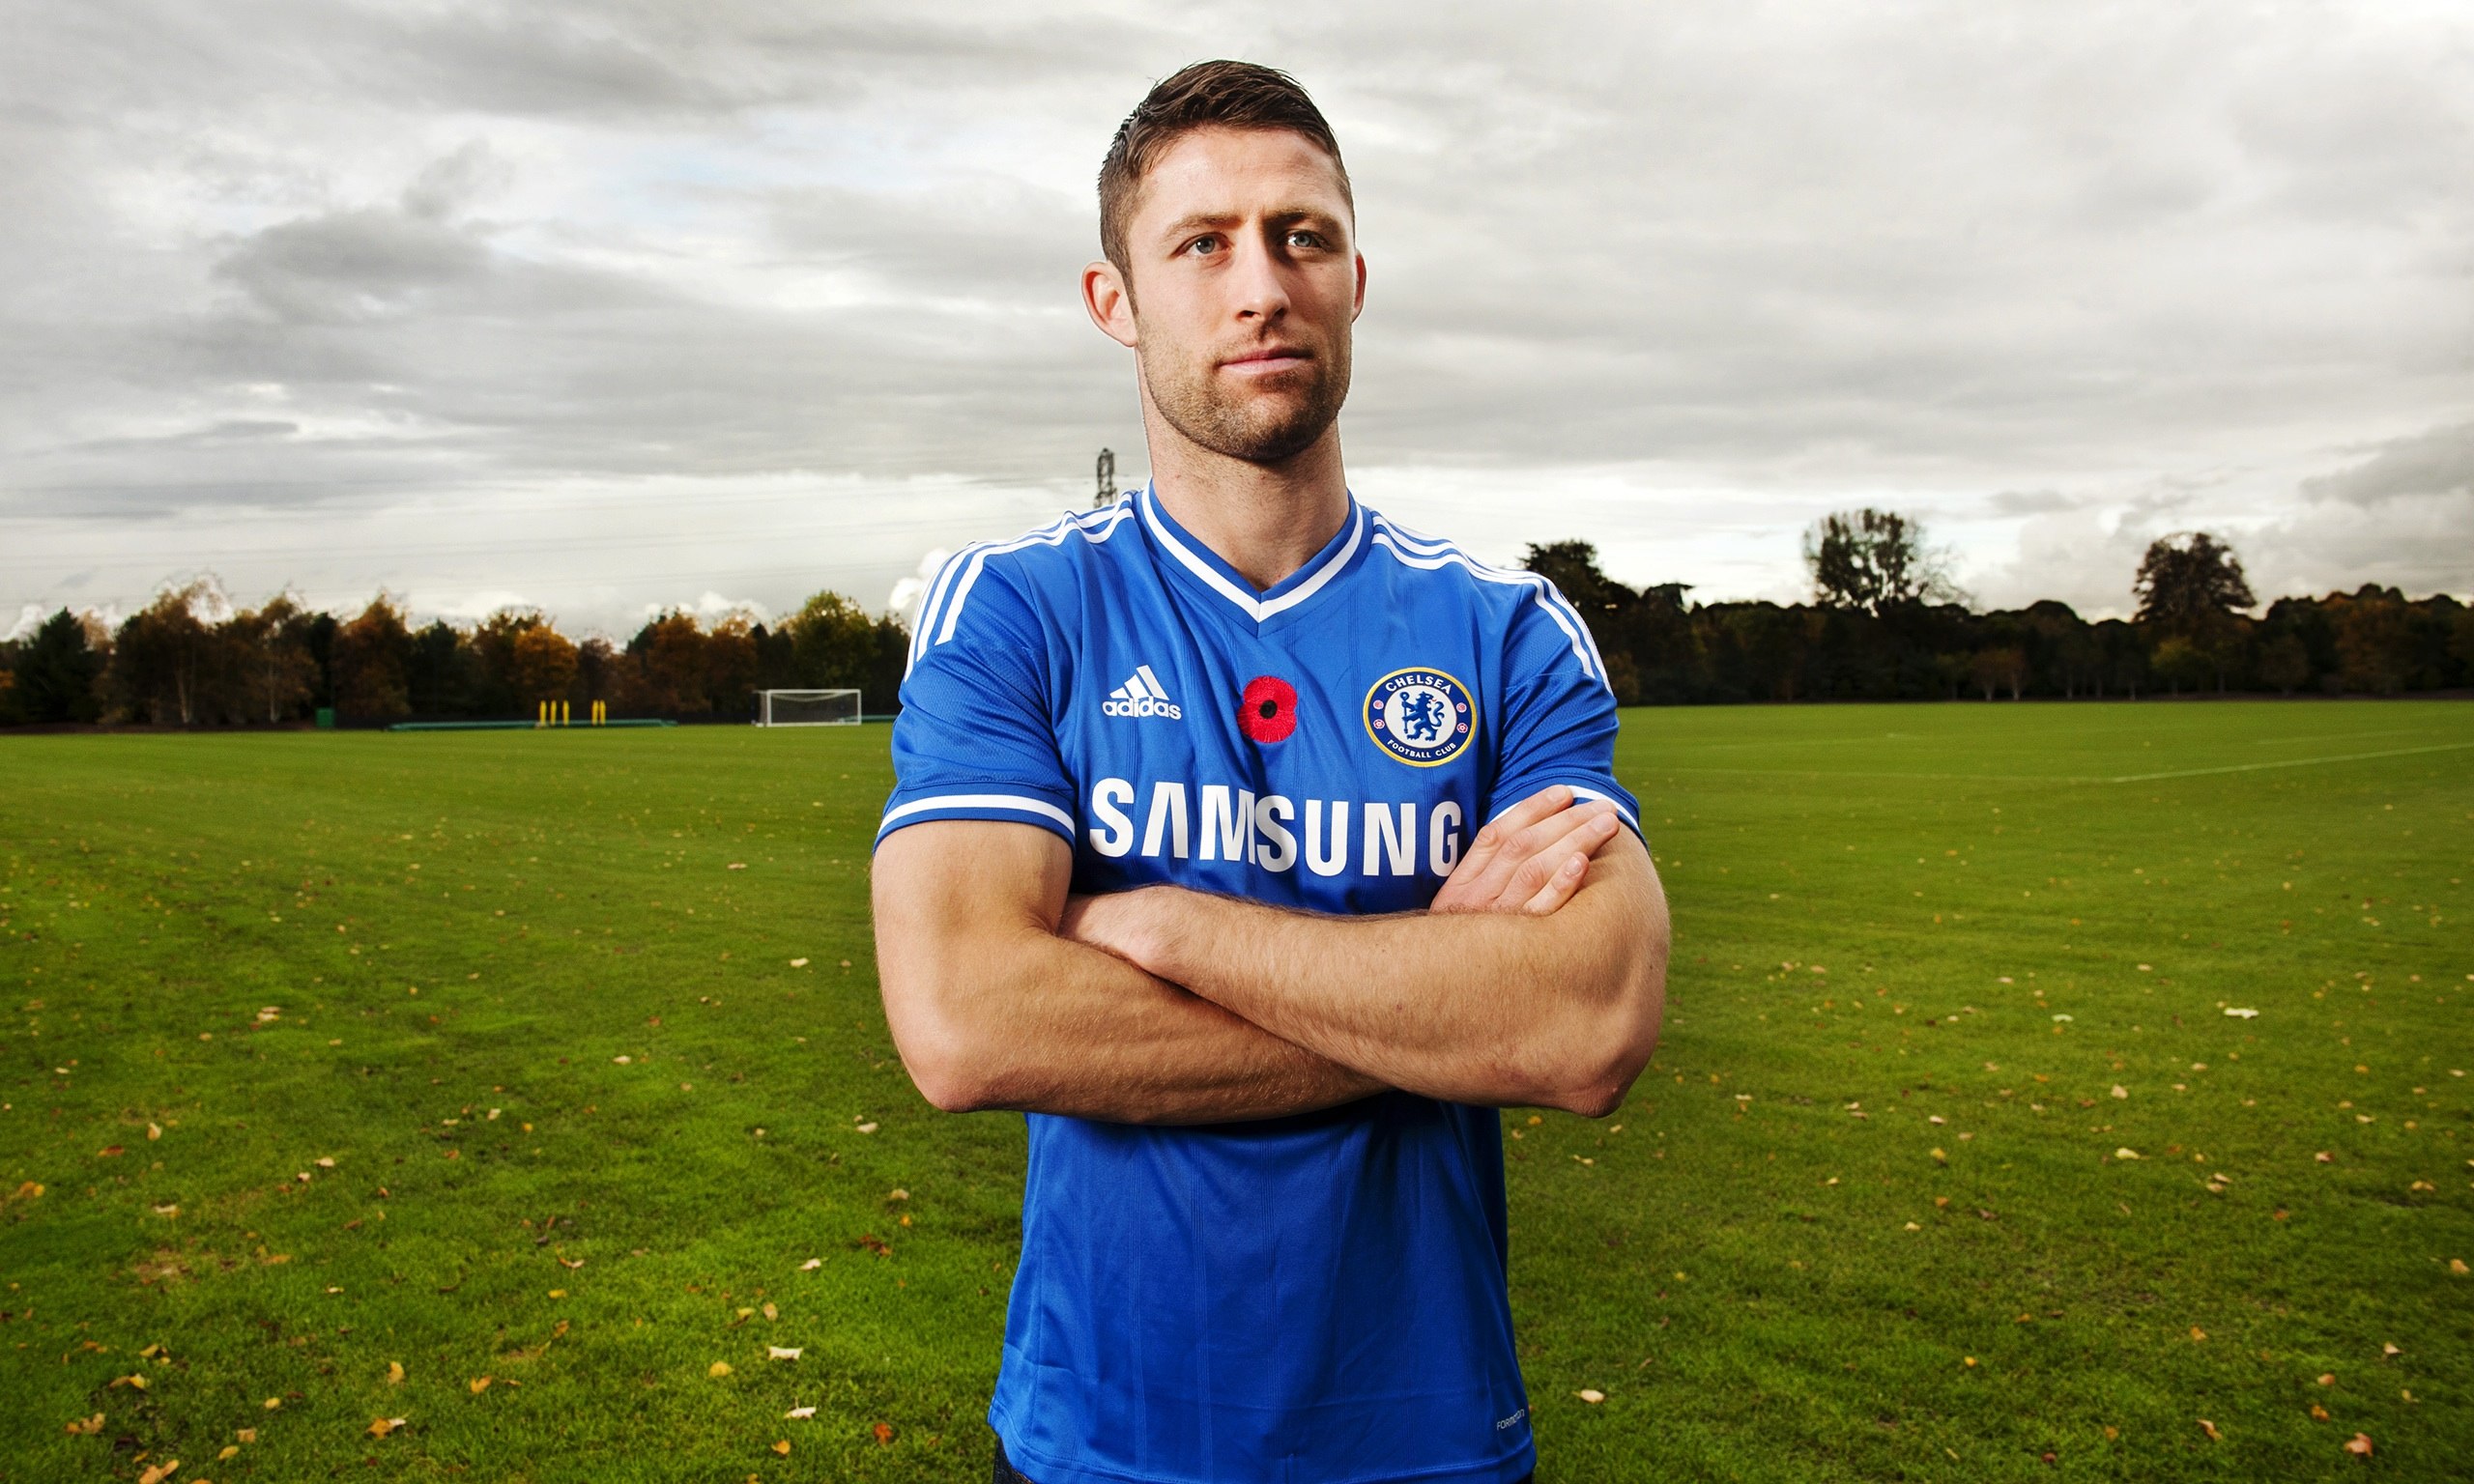 http://static.guim.co.uk/sys-images/Football/Pix/pictures/2013/11/8/1383935223764/Gary-Cahill--014.jpg